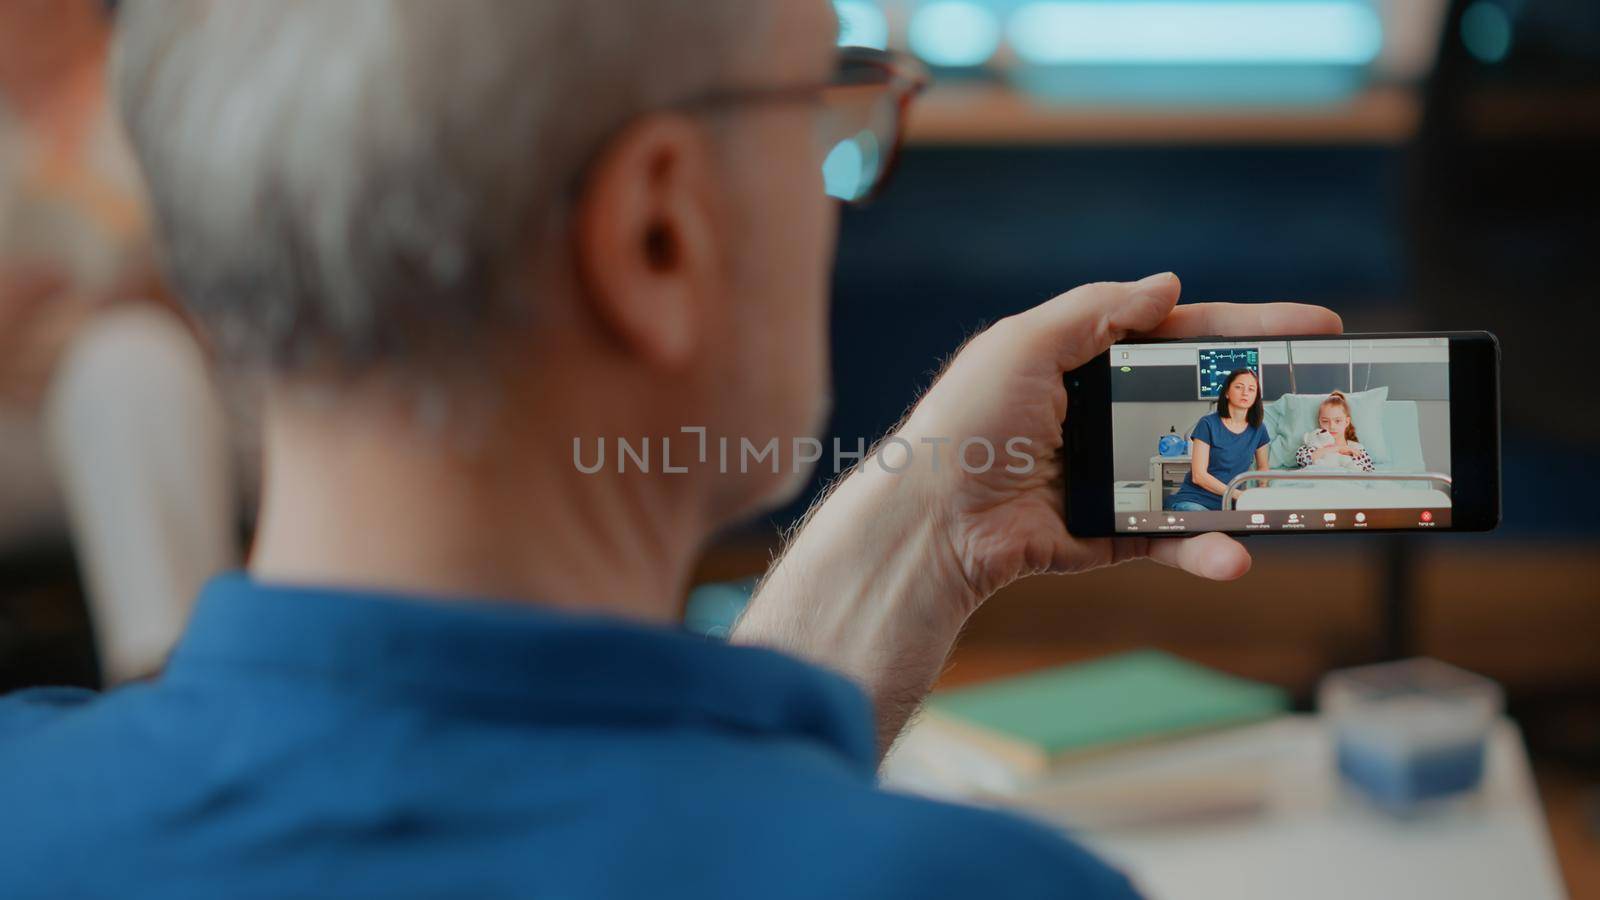 Retired adult using online video call on mobile phone by DCStudio